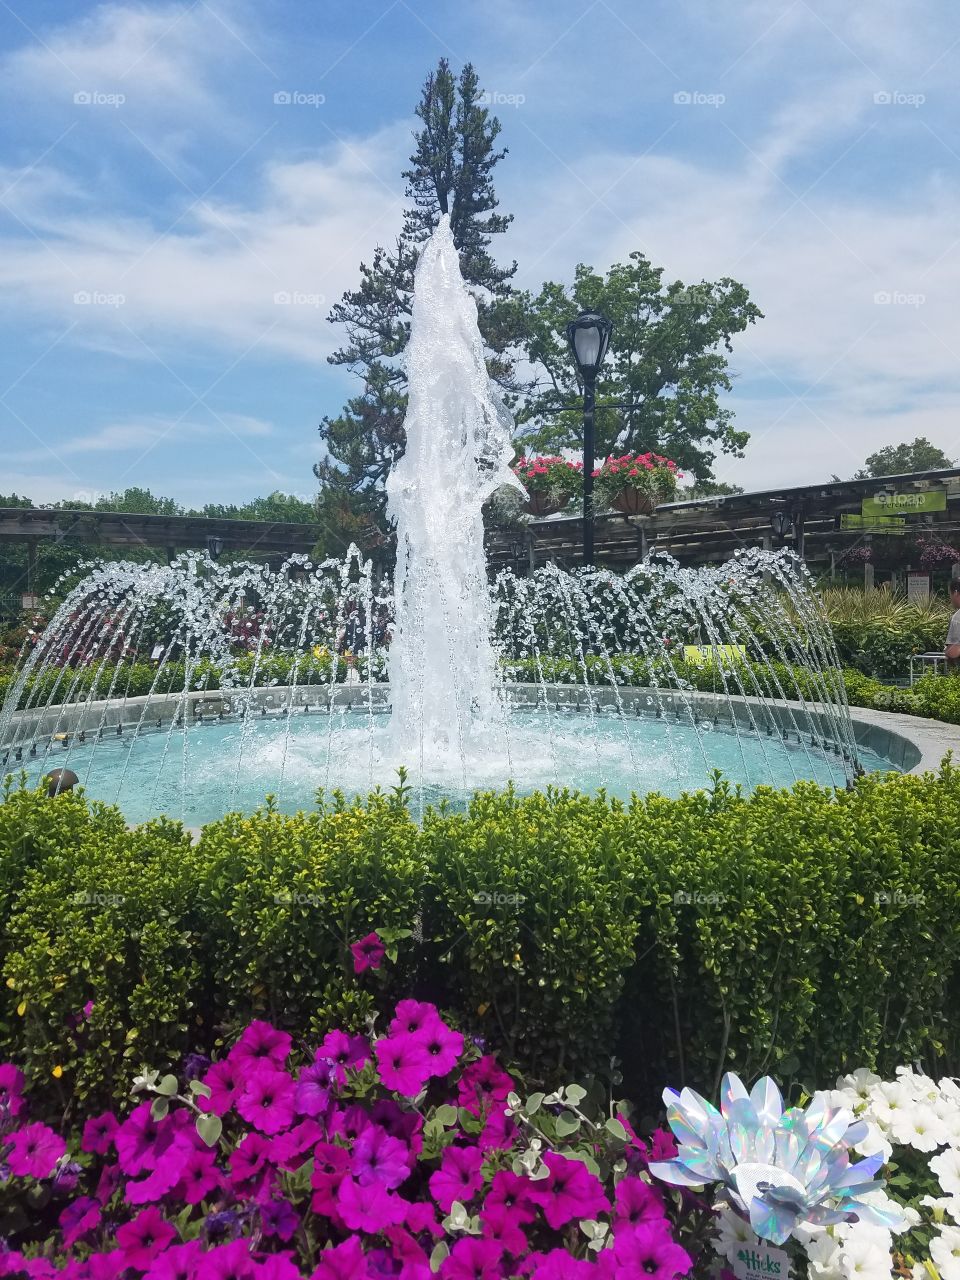 Hicks Nurseries - June 2017 - Taken on Android Phone - Galaxy S7 - Water Fountains